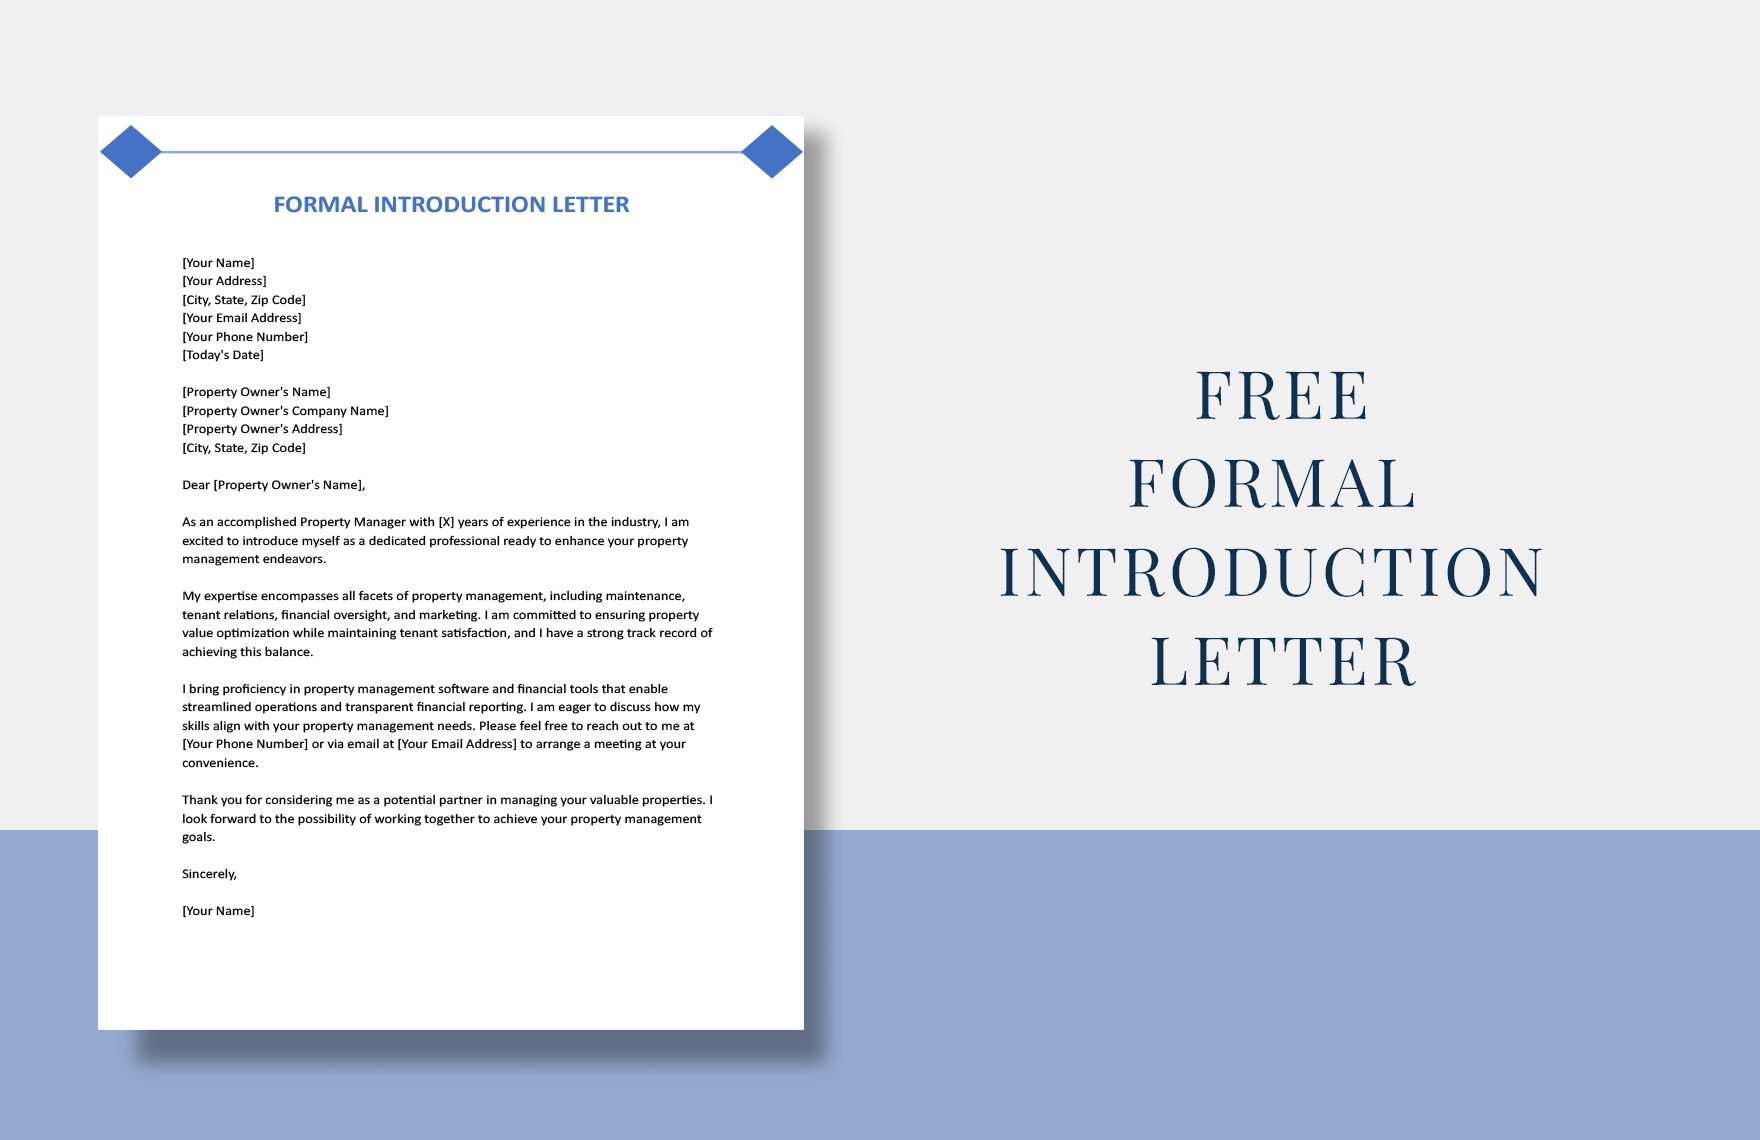 Free Formal Introduction Letter